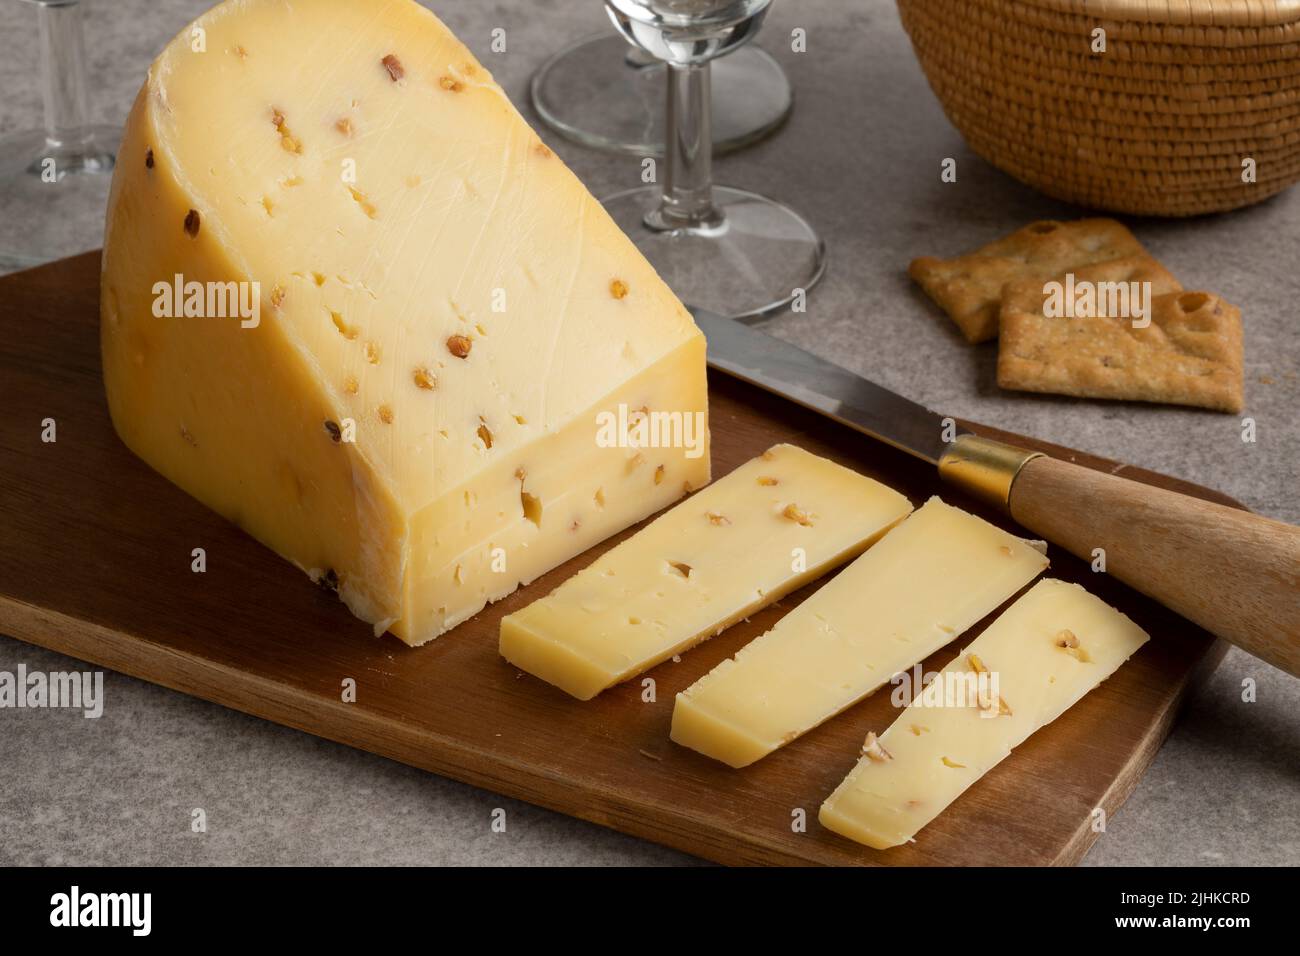 Piece of Fenugreek cheese and slices on a cutting board close up Stock Photo